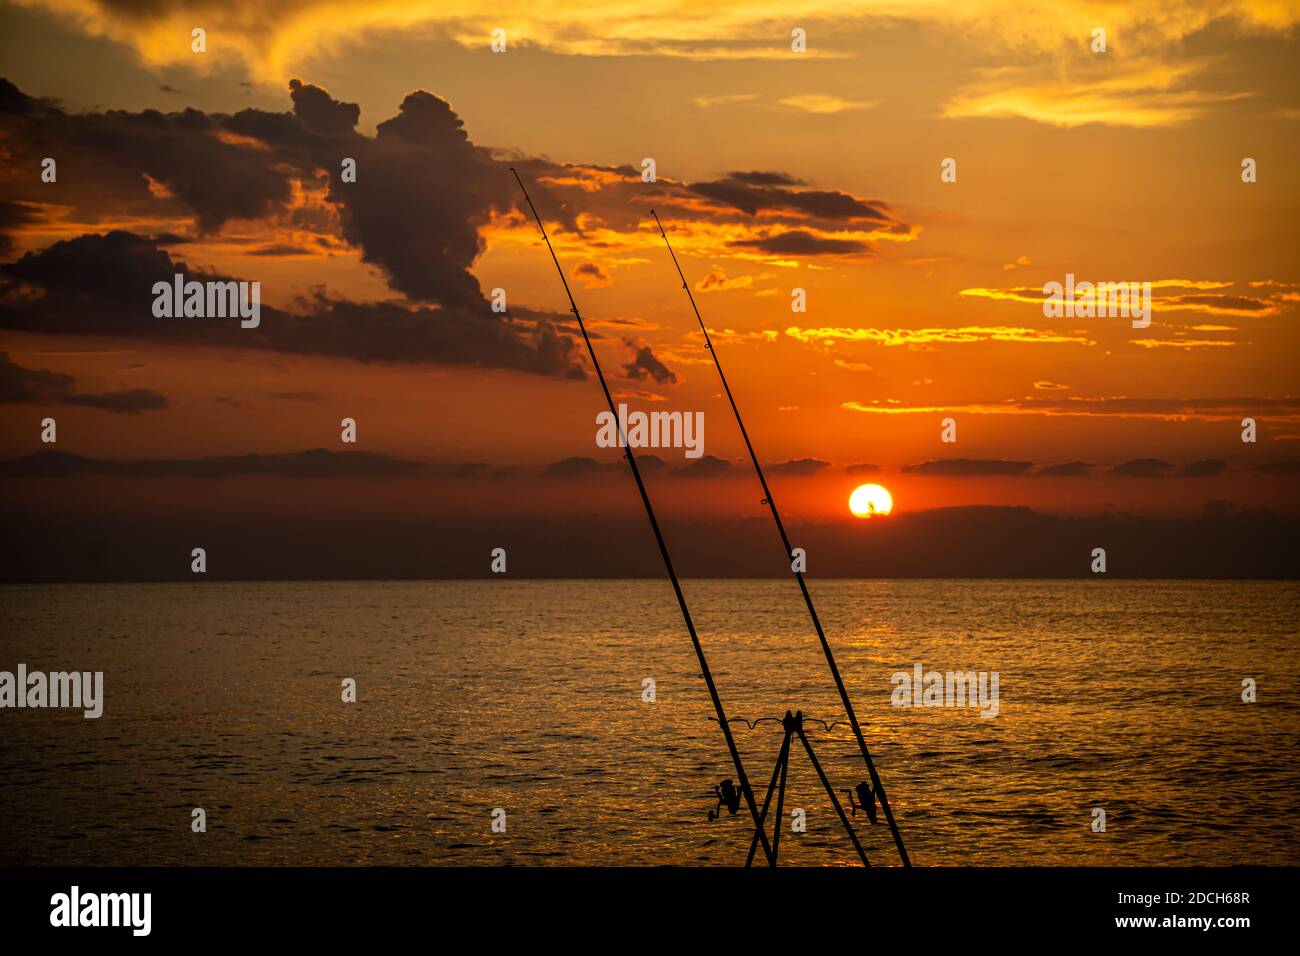 frontal view of sunset over the sea with two fishing rods in the foreground Stock Photo